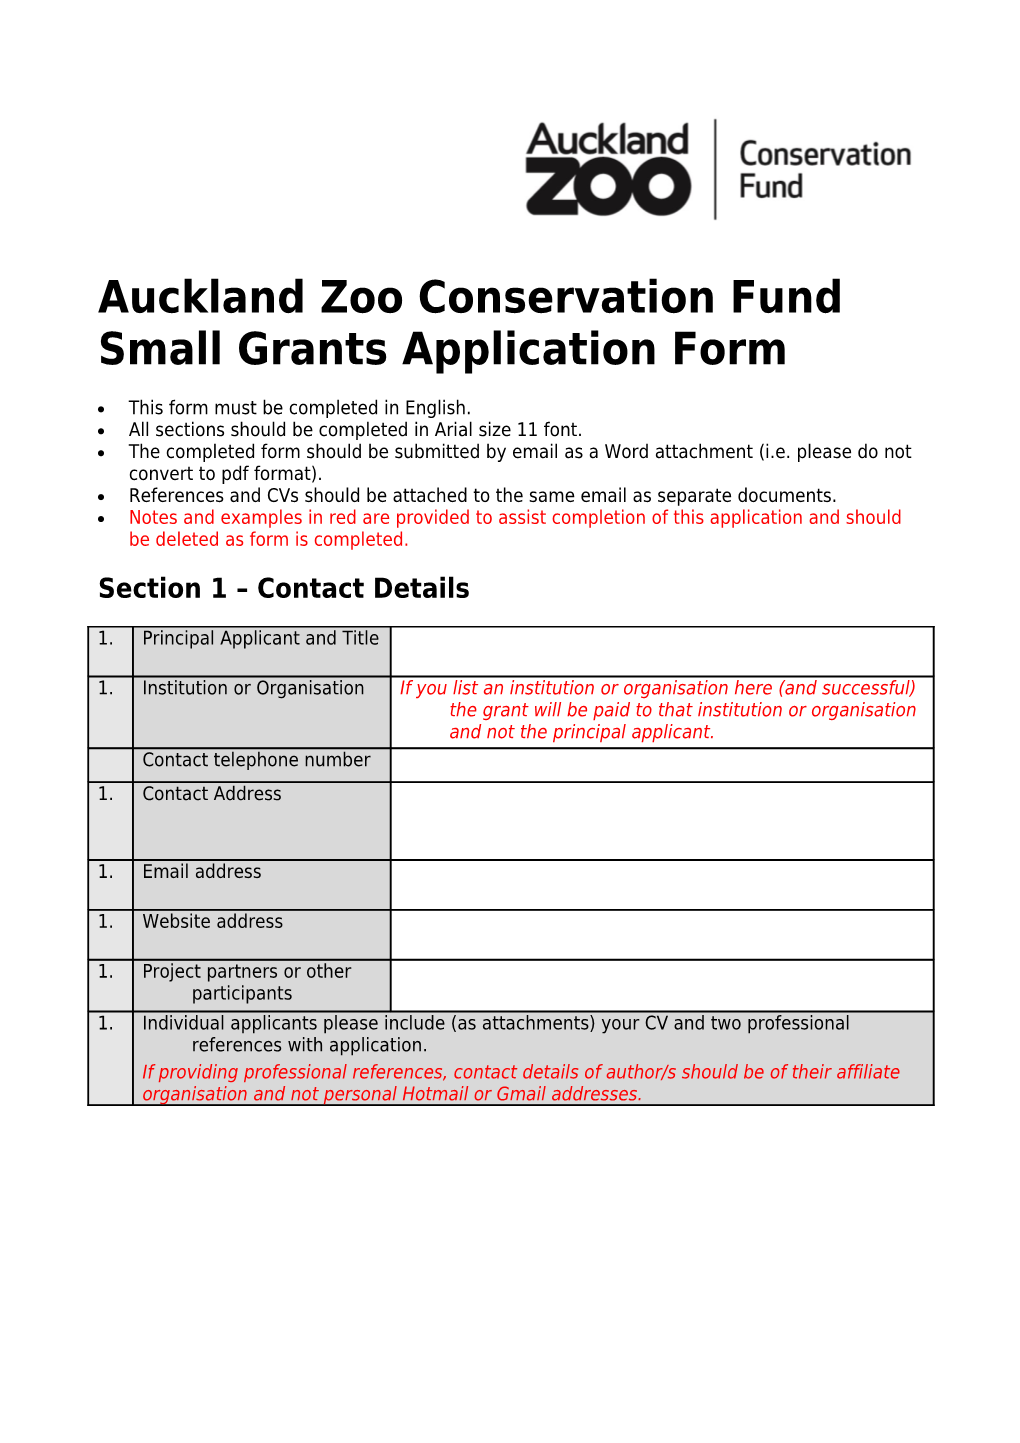 Auckland Zoo Conservation Fund